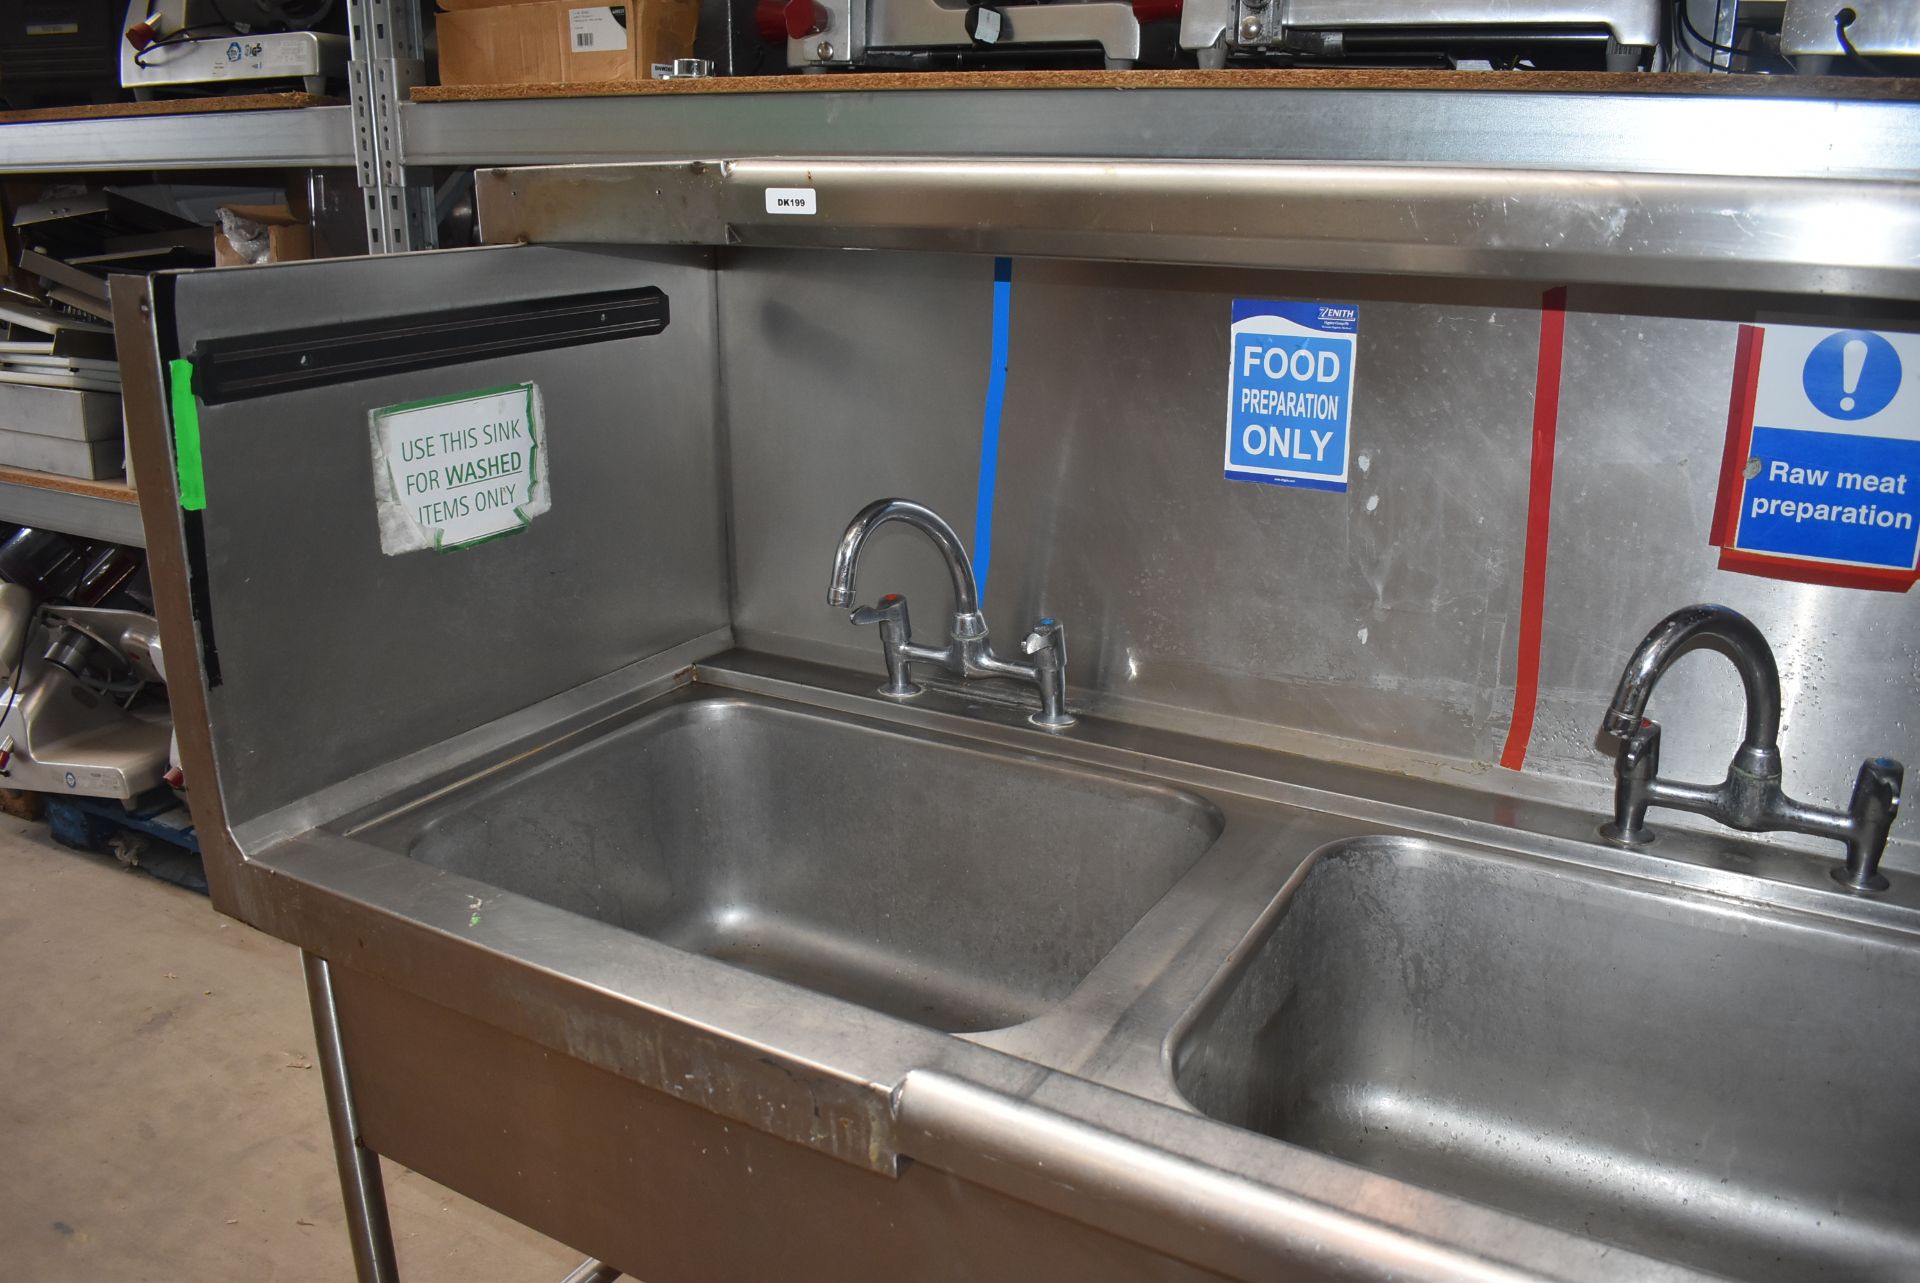 1 x Stainless Steel Twin Sink Wash Unit With Mixer Taps and Splash Back Surround - Width: 125 cms - Image 10 of 11